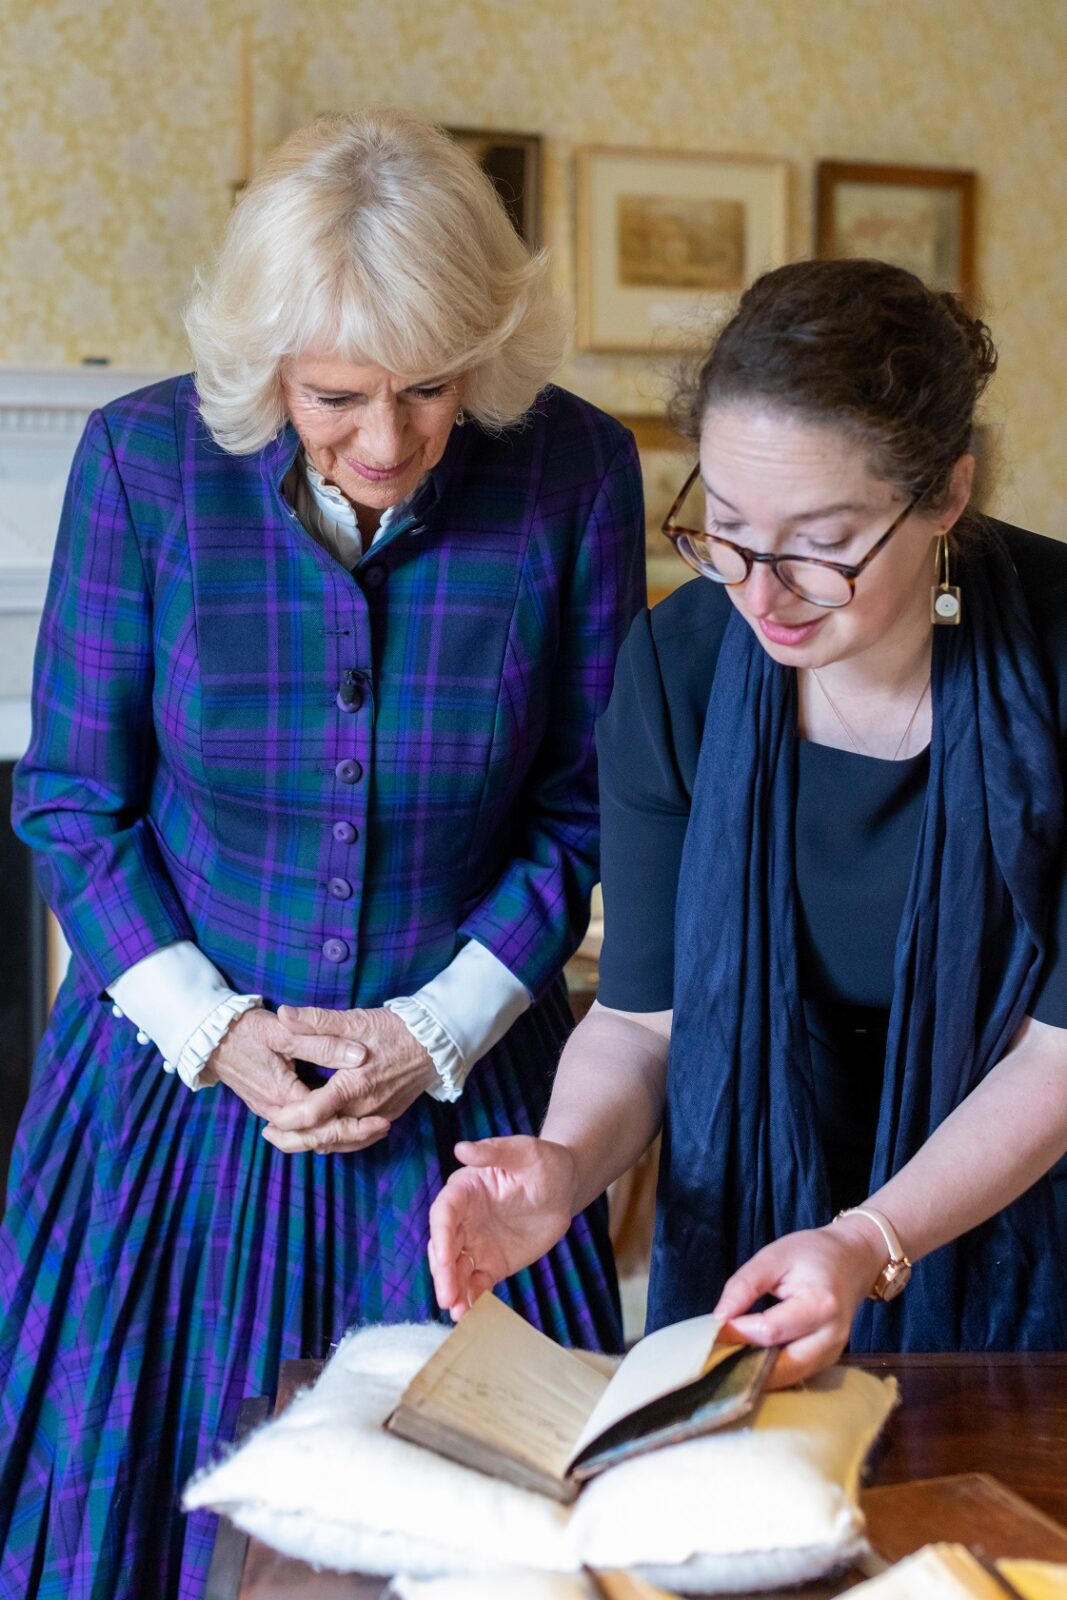 HRH The Duchess of Cornwall with Director Lizzie Dunford and a first edition of Pride and Prejudice.